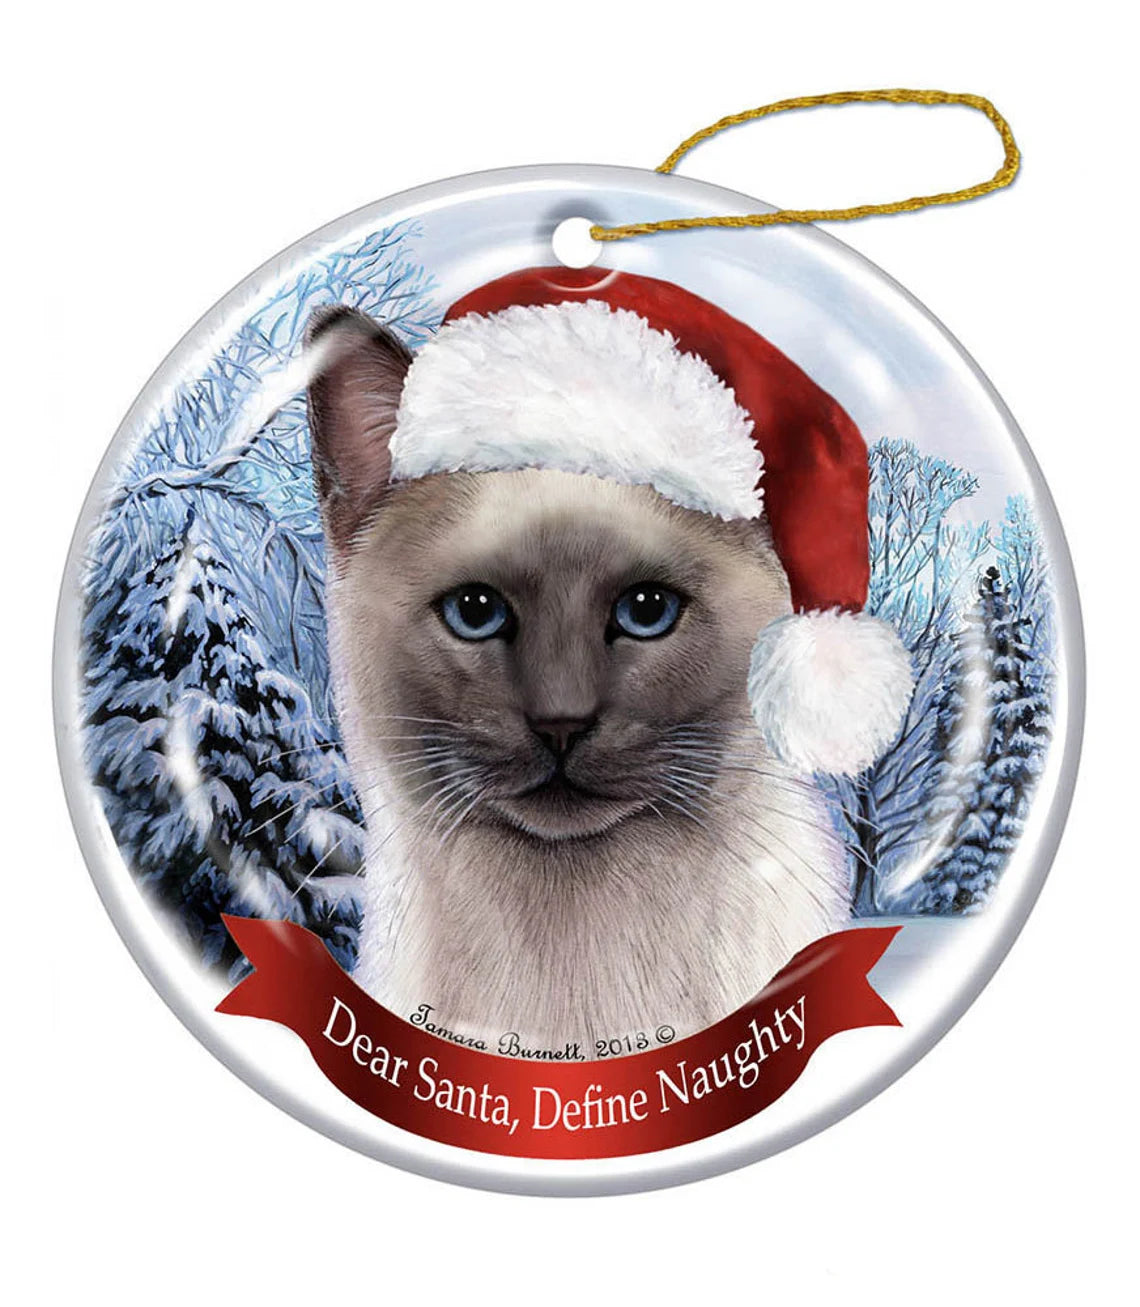 Holiday Pet Gifts Siamese CAT (Blue Point) Santa Hat Dog Porcelain Christmas Ornament